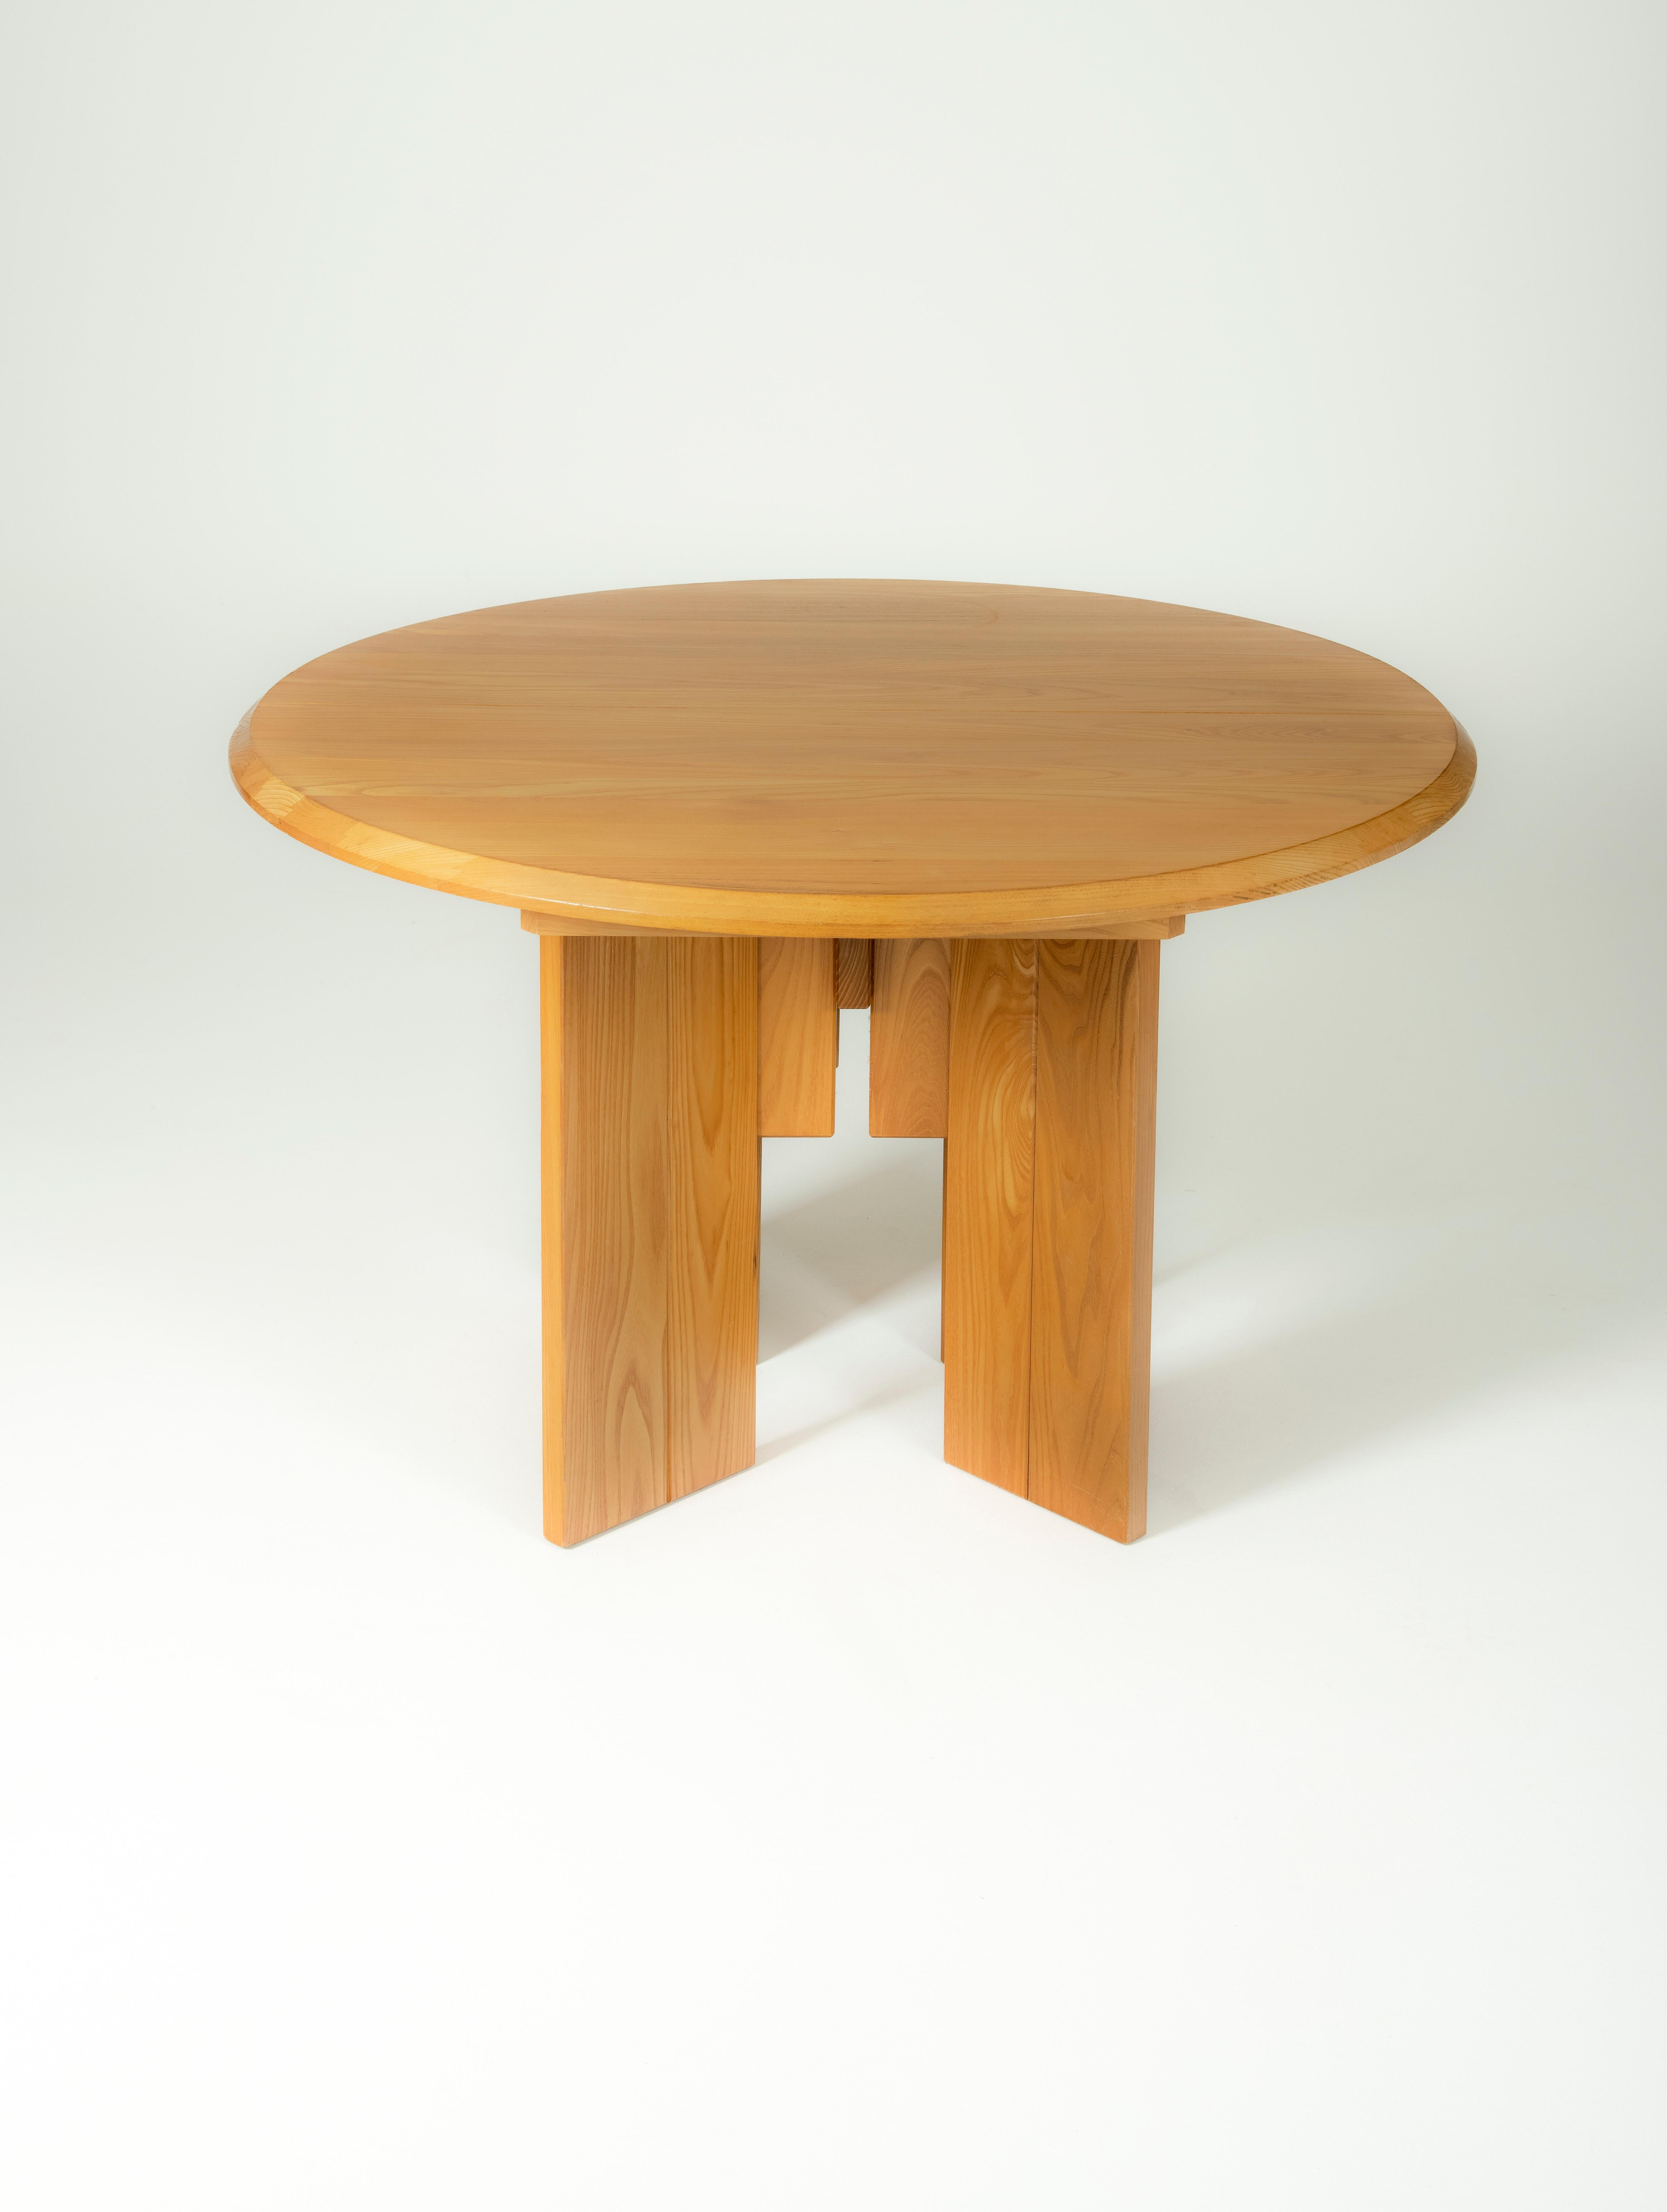 Round solid elm dining table designed by Maison Regain in the 1980s. The table comes with an extension to accommodate both 4 and 6 people. Excellent condition.
LP746